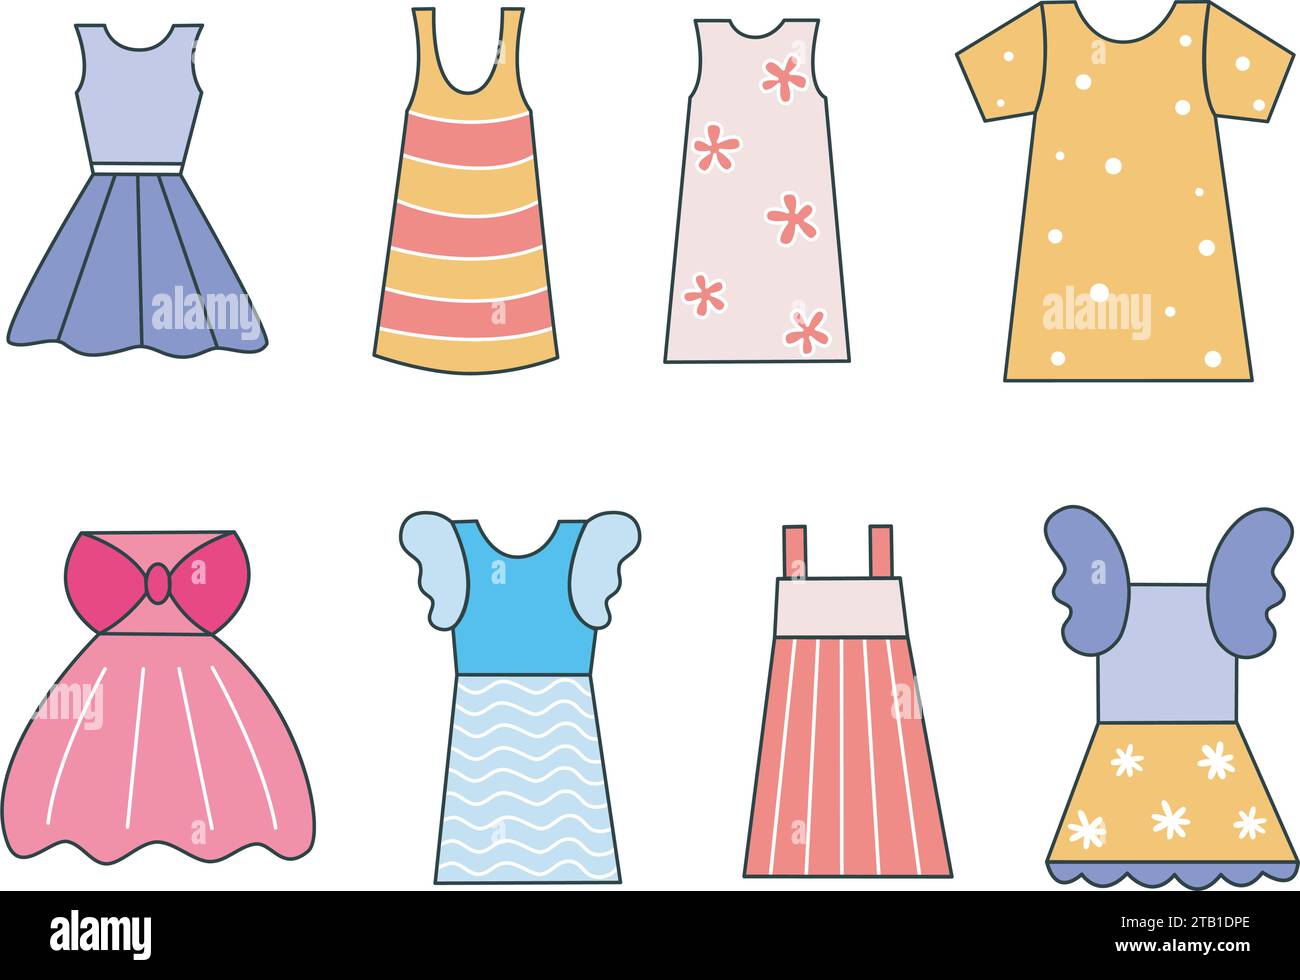 Cute dress for girls hand drawn set. Summer outfit for child clip art. Fashionable feminine clothing, isolated vector illustration Stock Vector